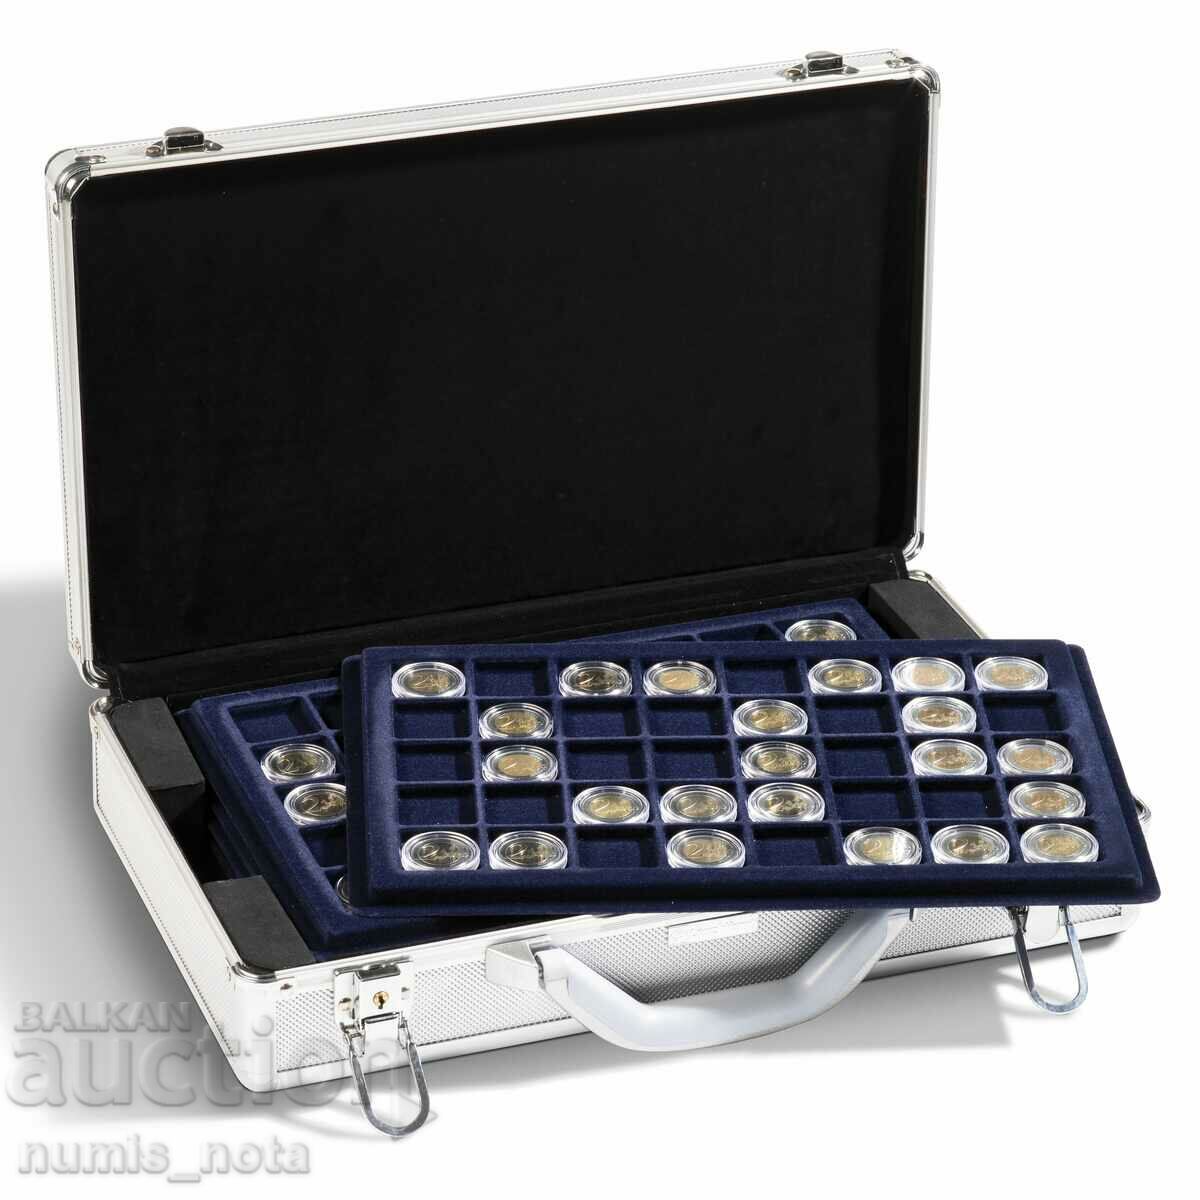 Aluminum suitcases with 6 trays for 240 €2 coins - LEUCHTT